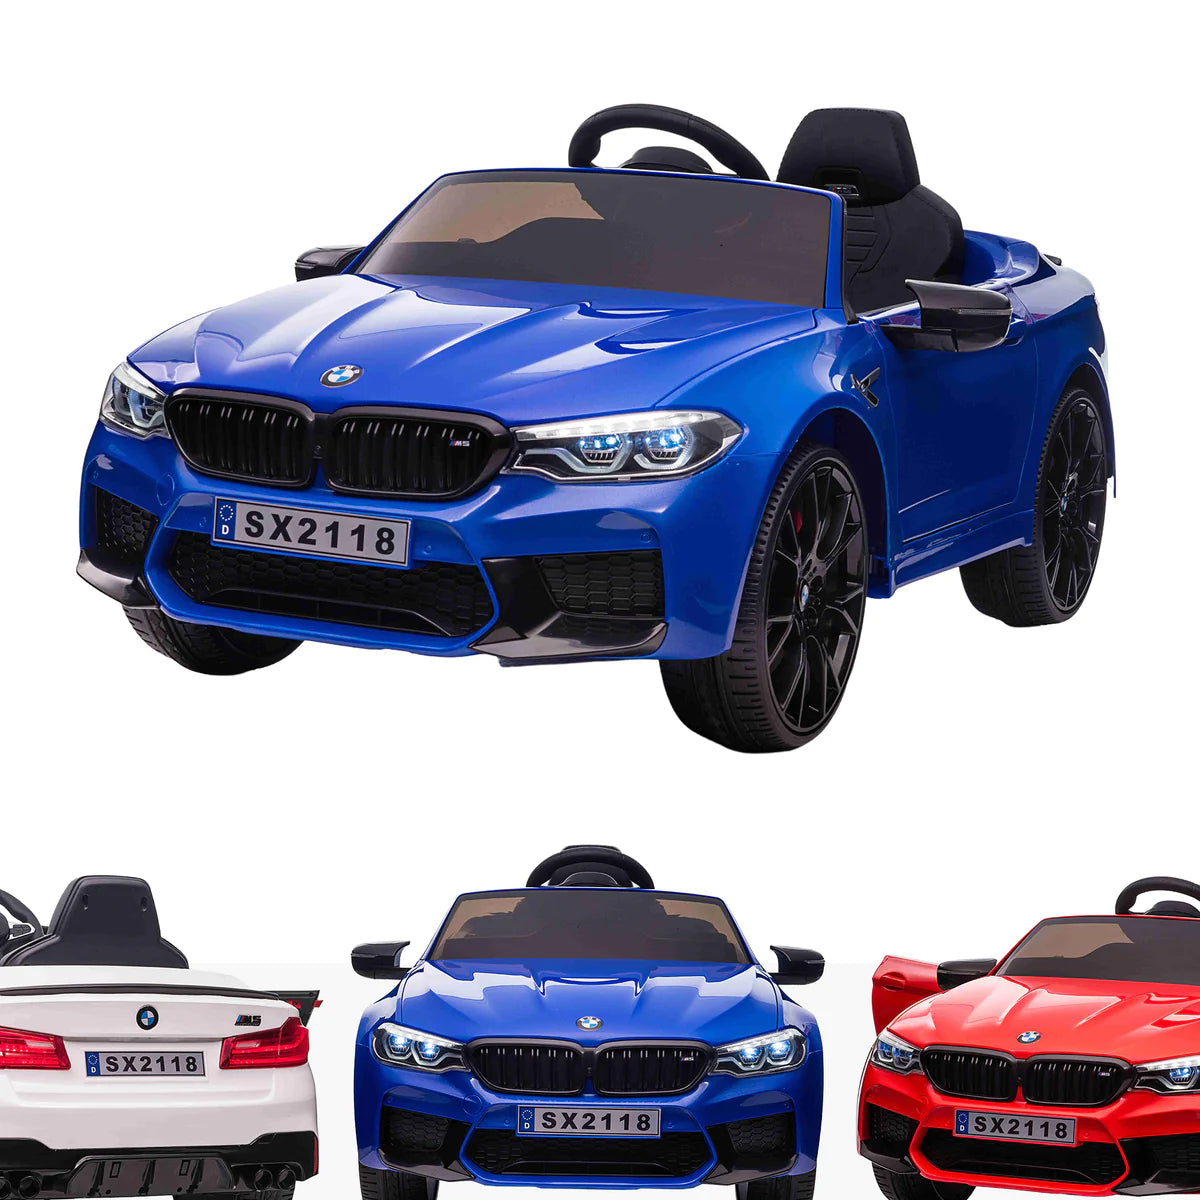 How to Choose a Kids BMW